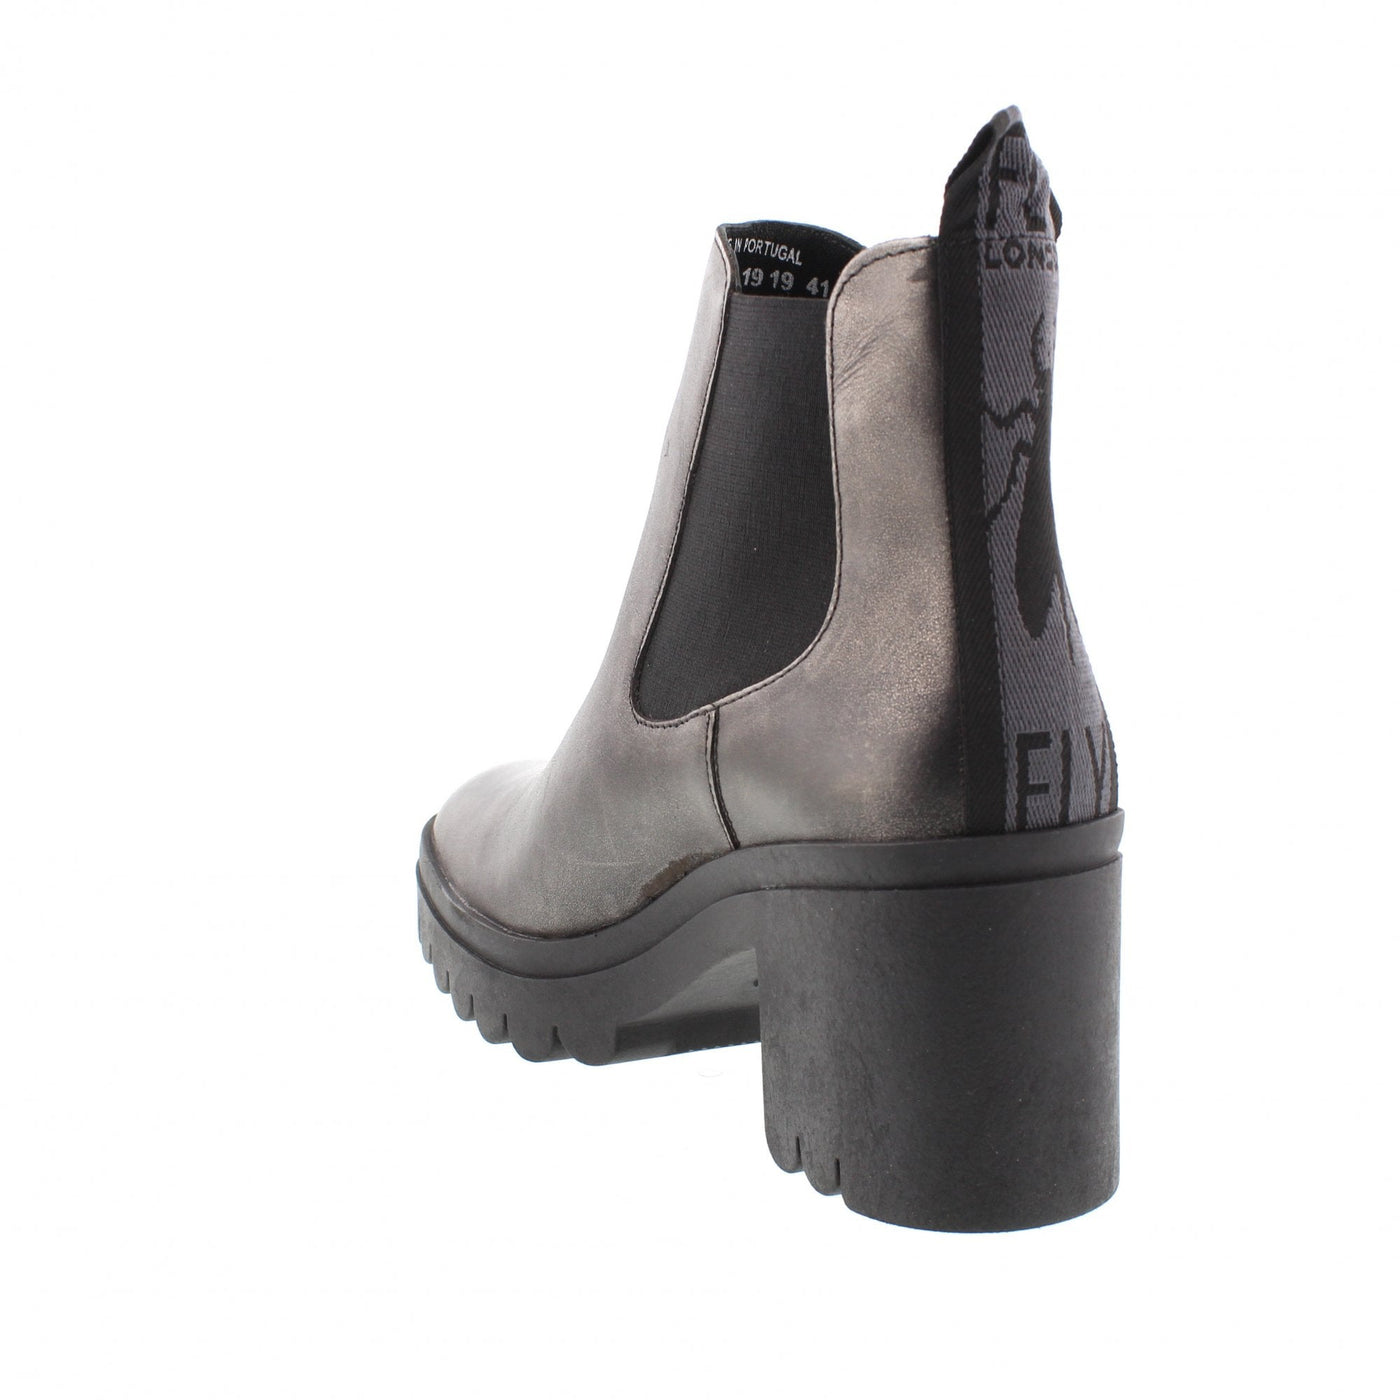 FLY LONDON TOPE GREY - Women Boots - Collective Shoes 